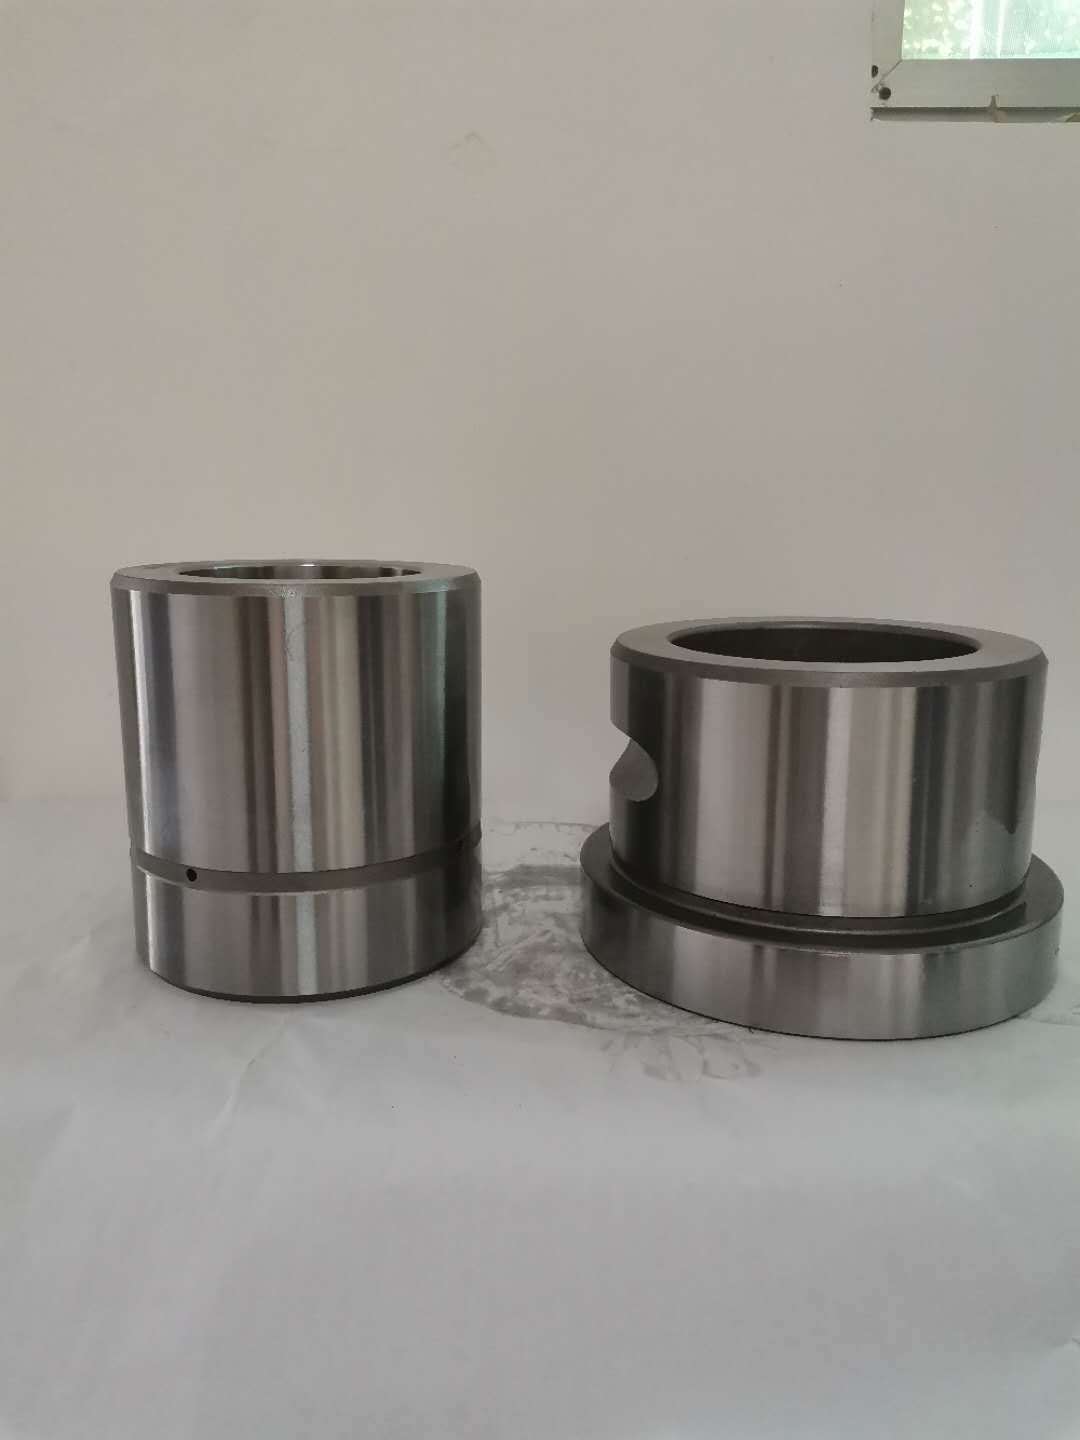 Msb Hydraulic Hammer Outer Bush for Excavators Spares Inner Bush